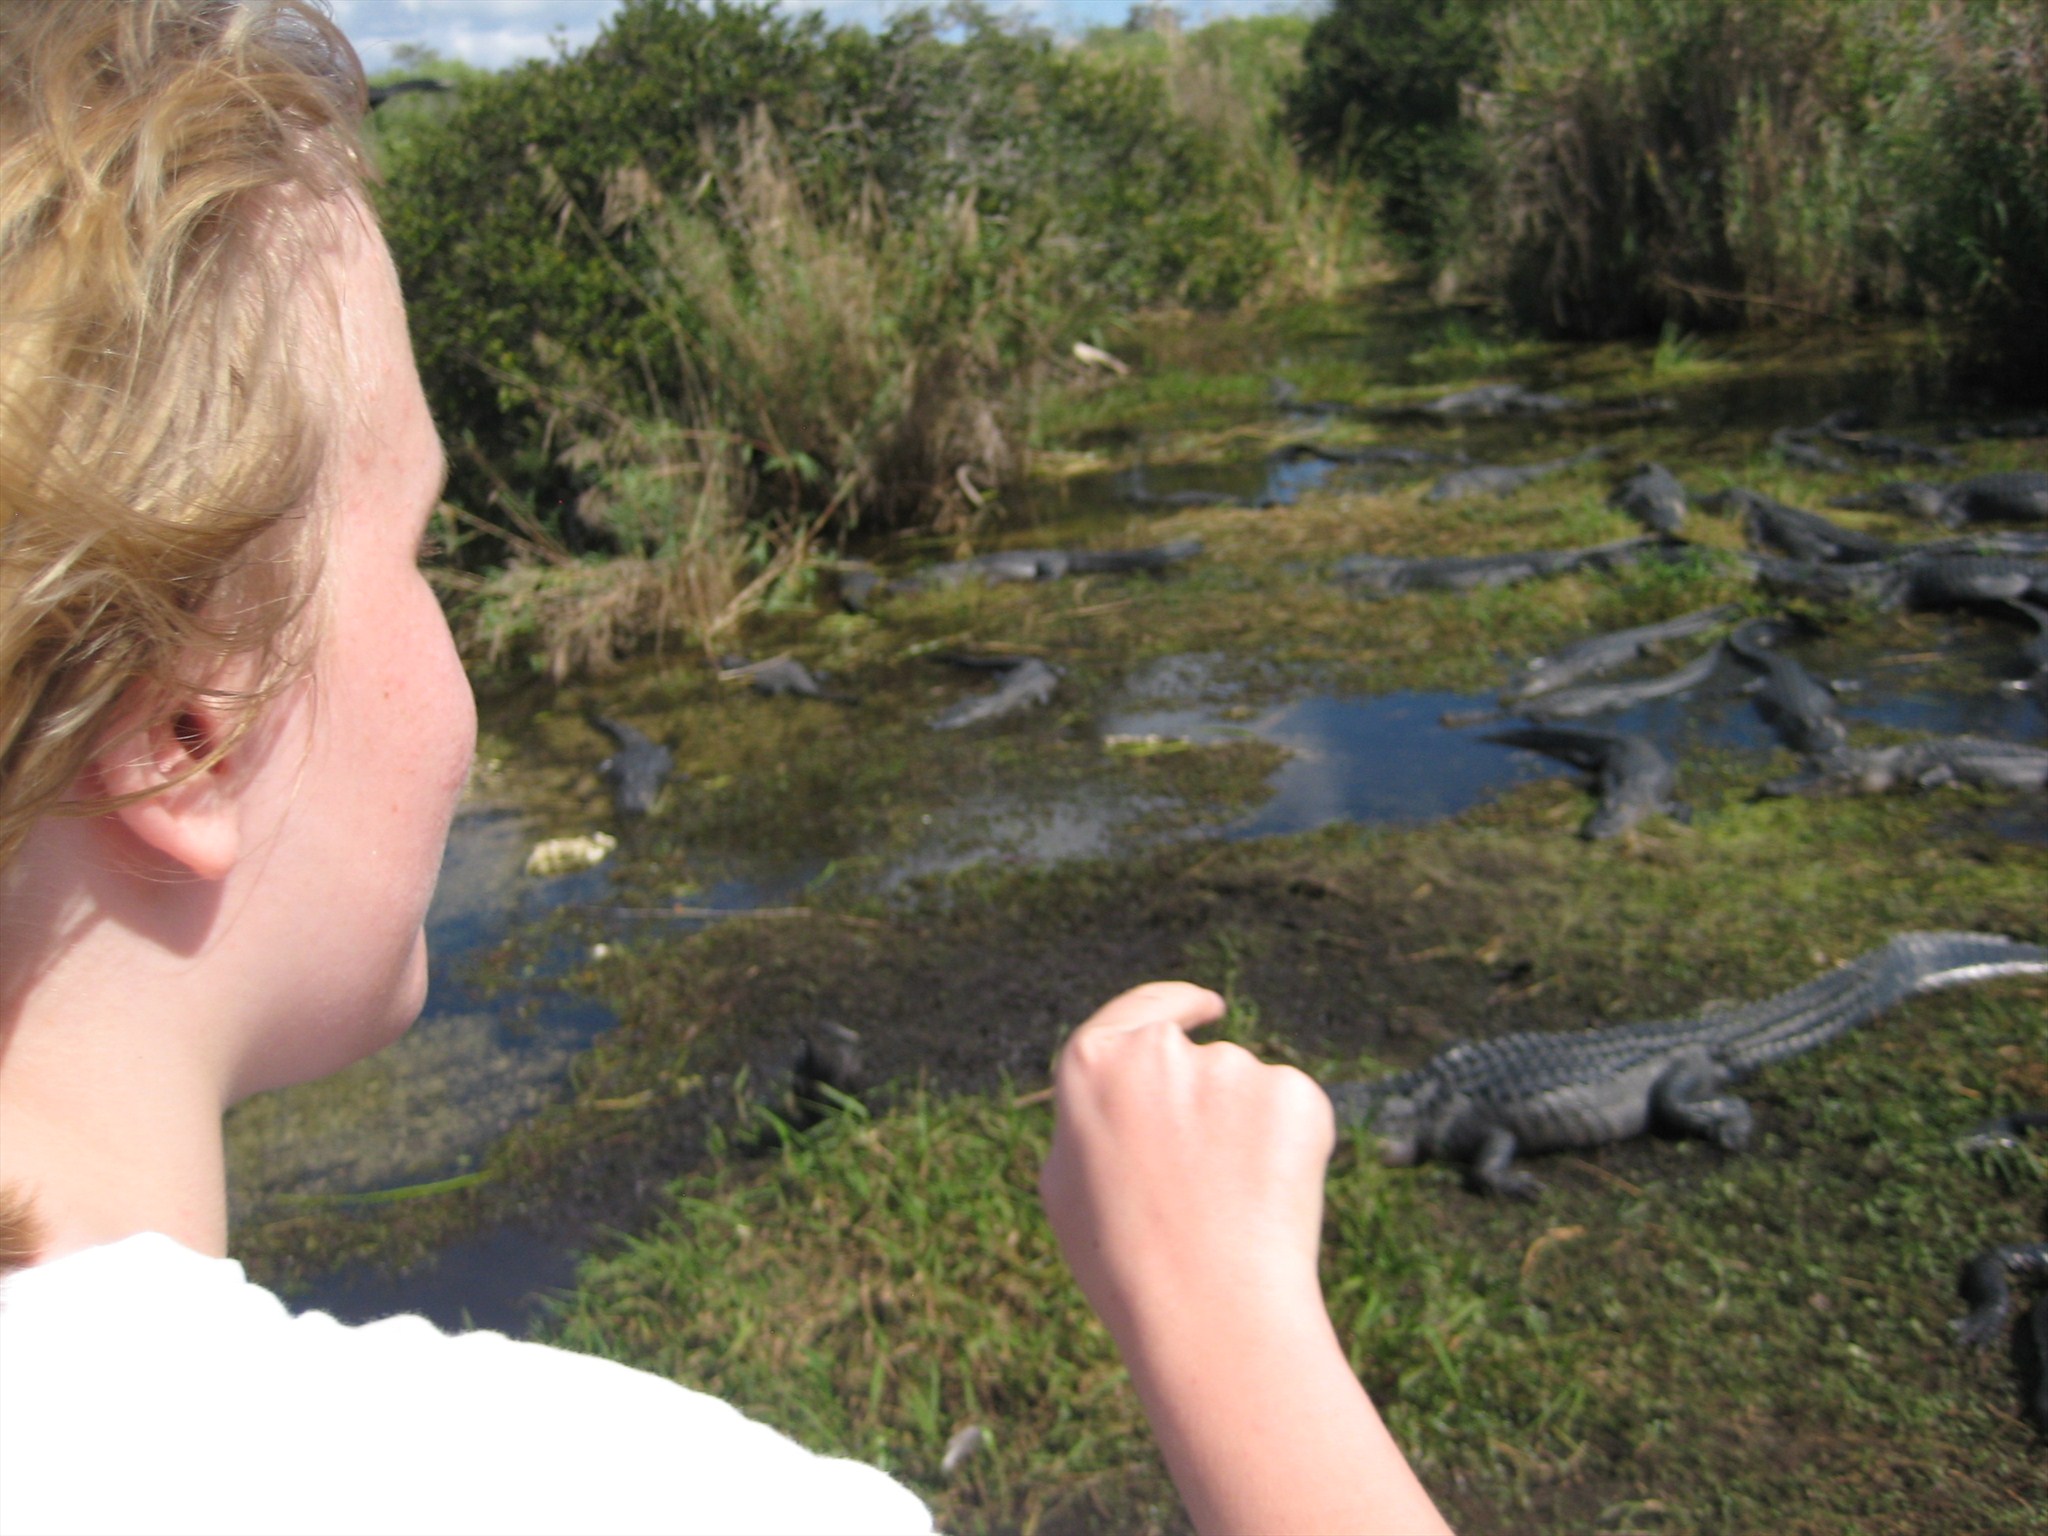 Counting some of the Everglades' natural residents. Photo by geocacher lilyfly.